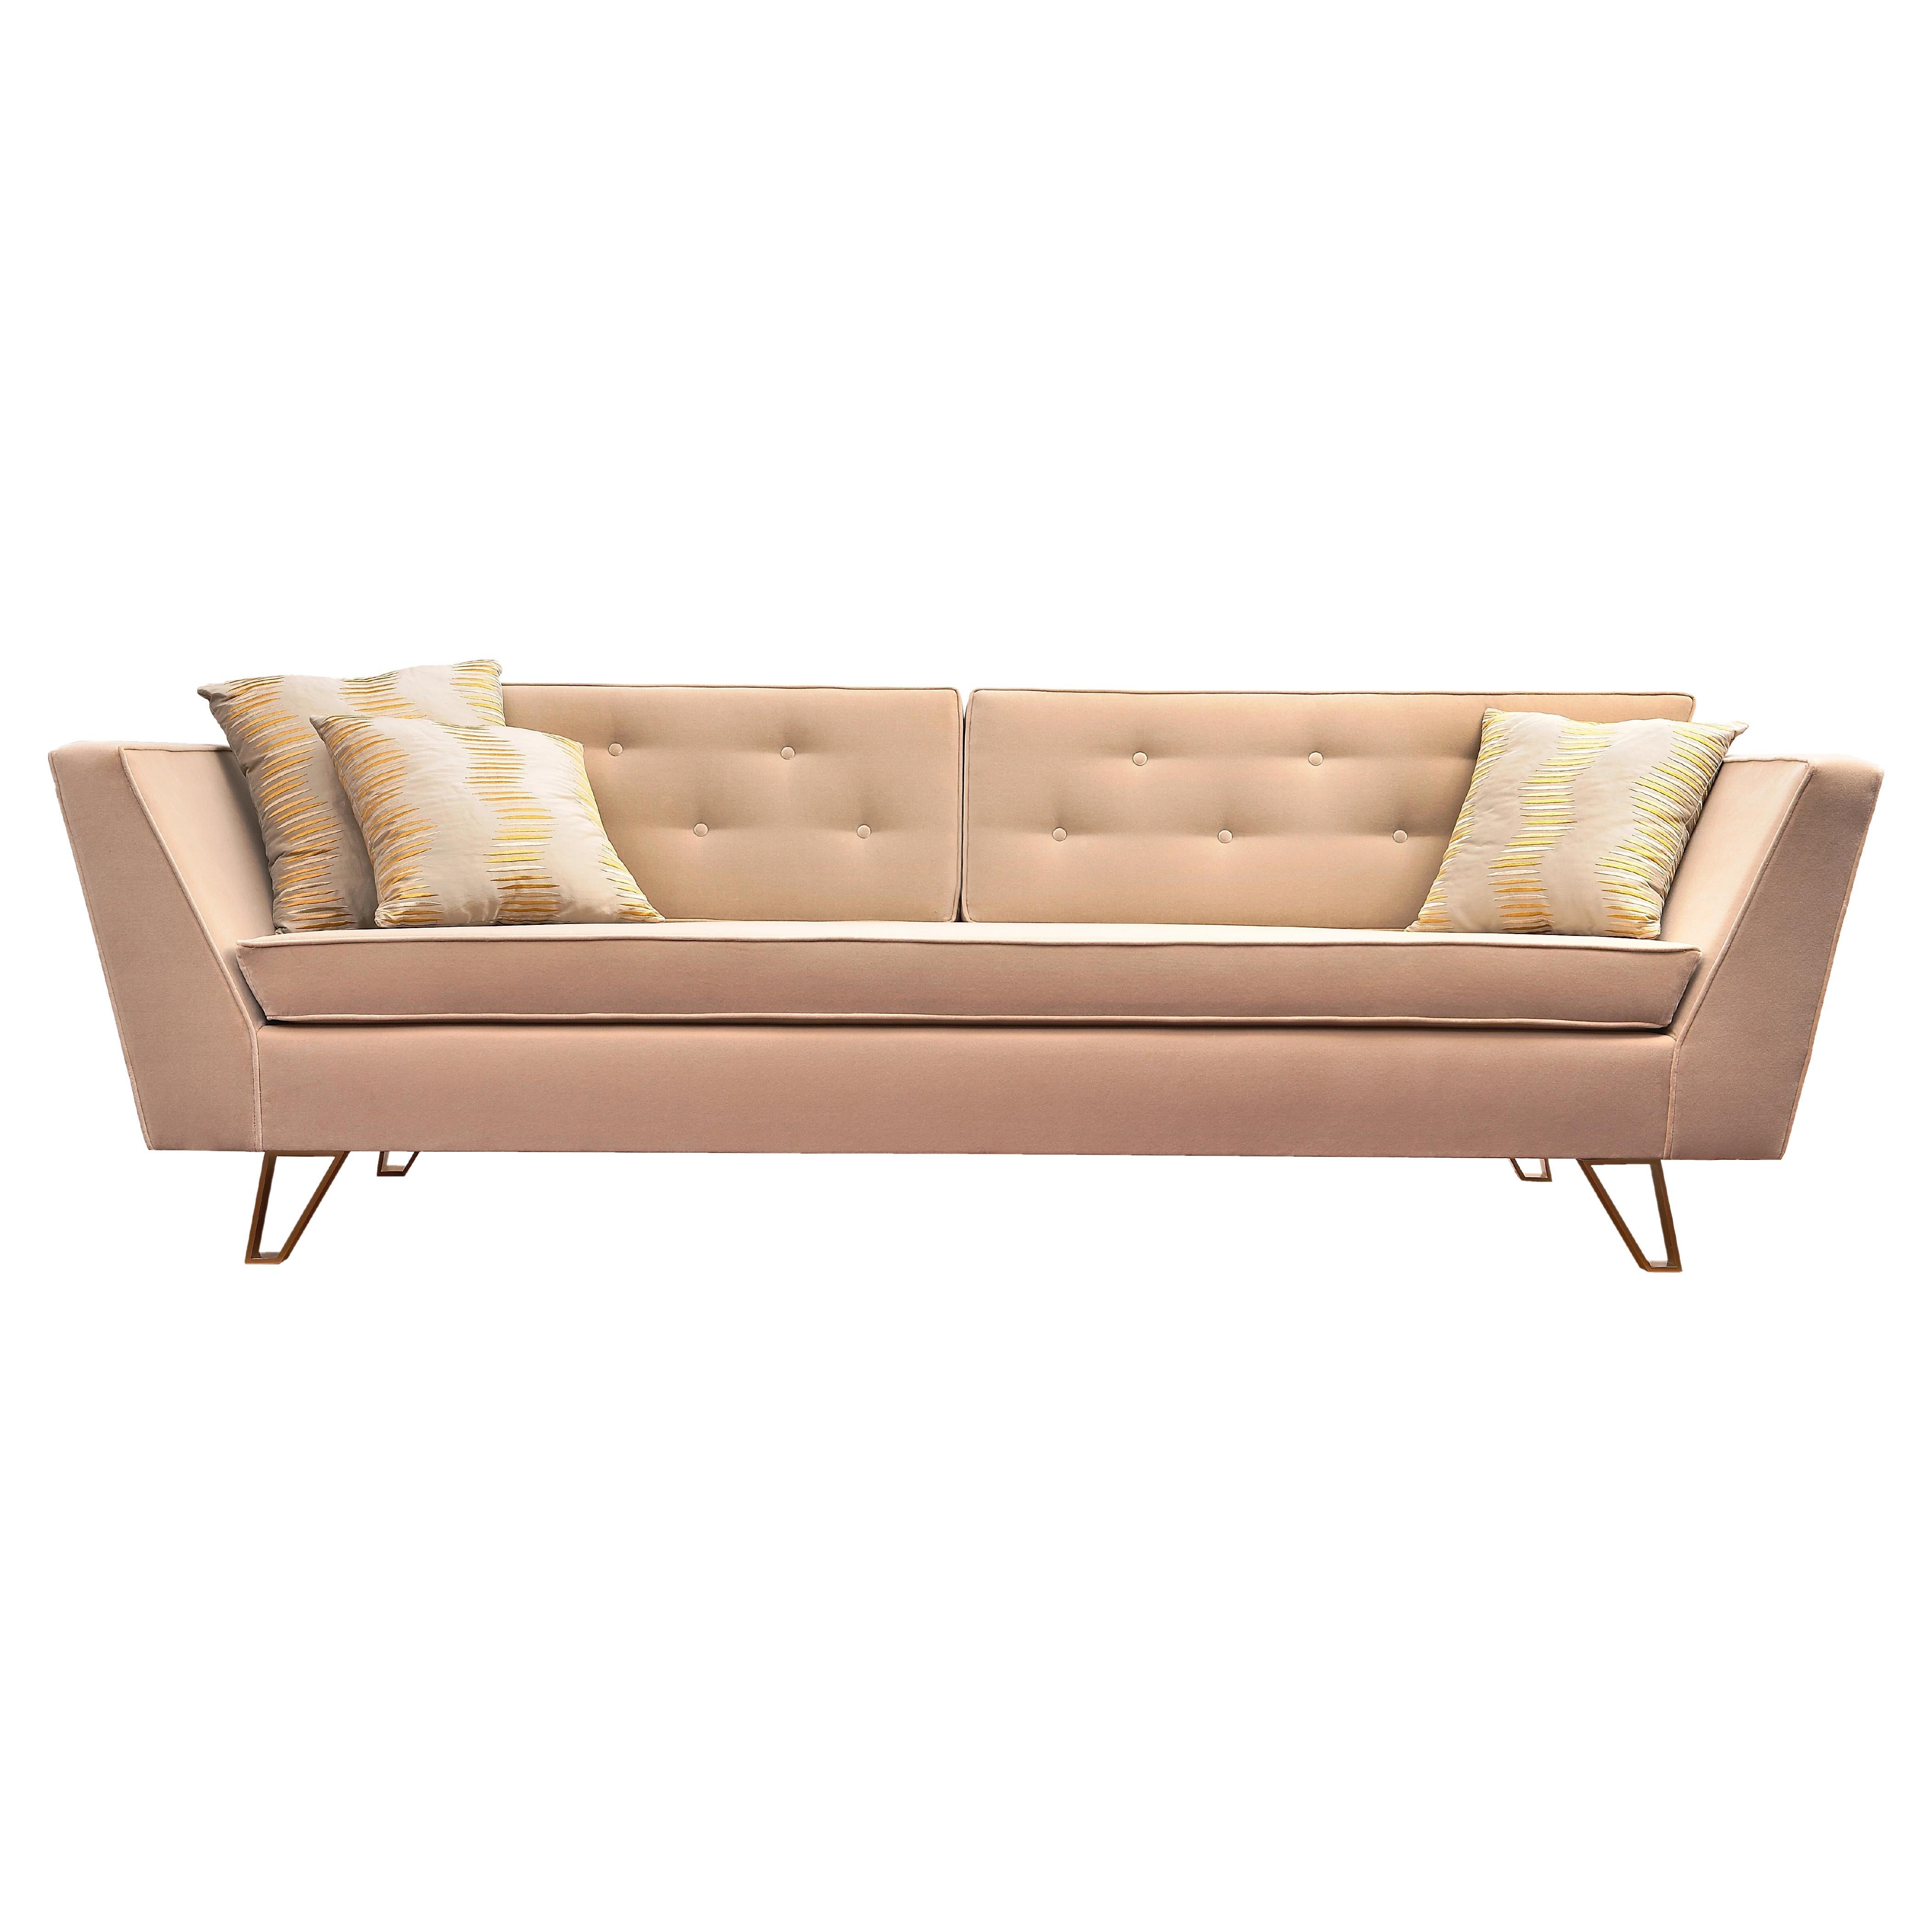 Contemporary Handmade Sofa "Arktos" Inclined Arm Rests and Brass Legs by Anaktae